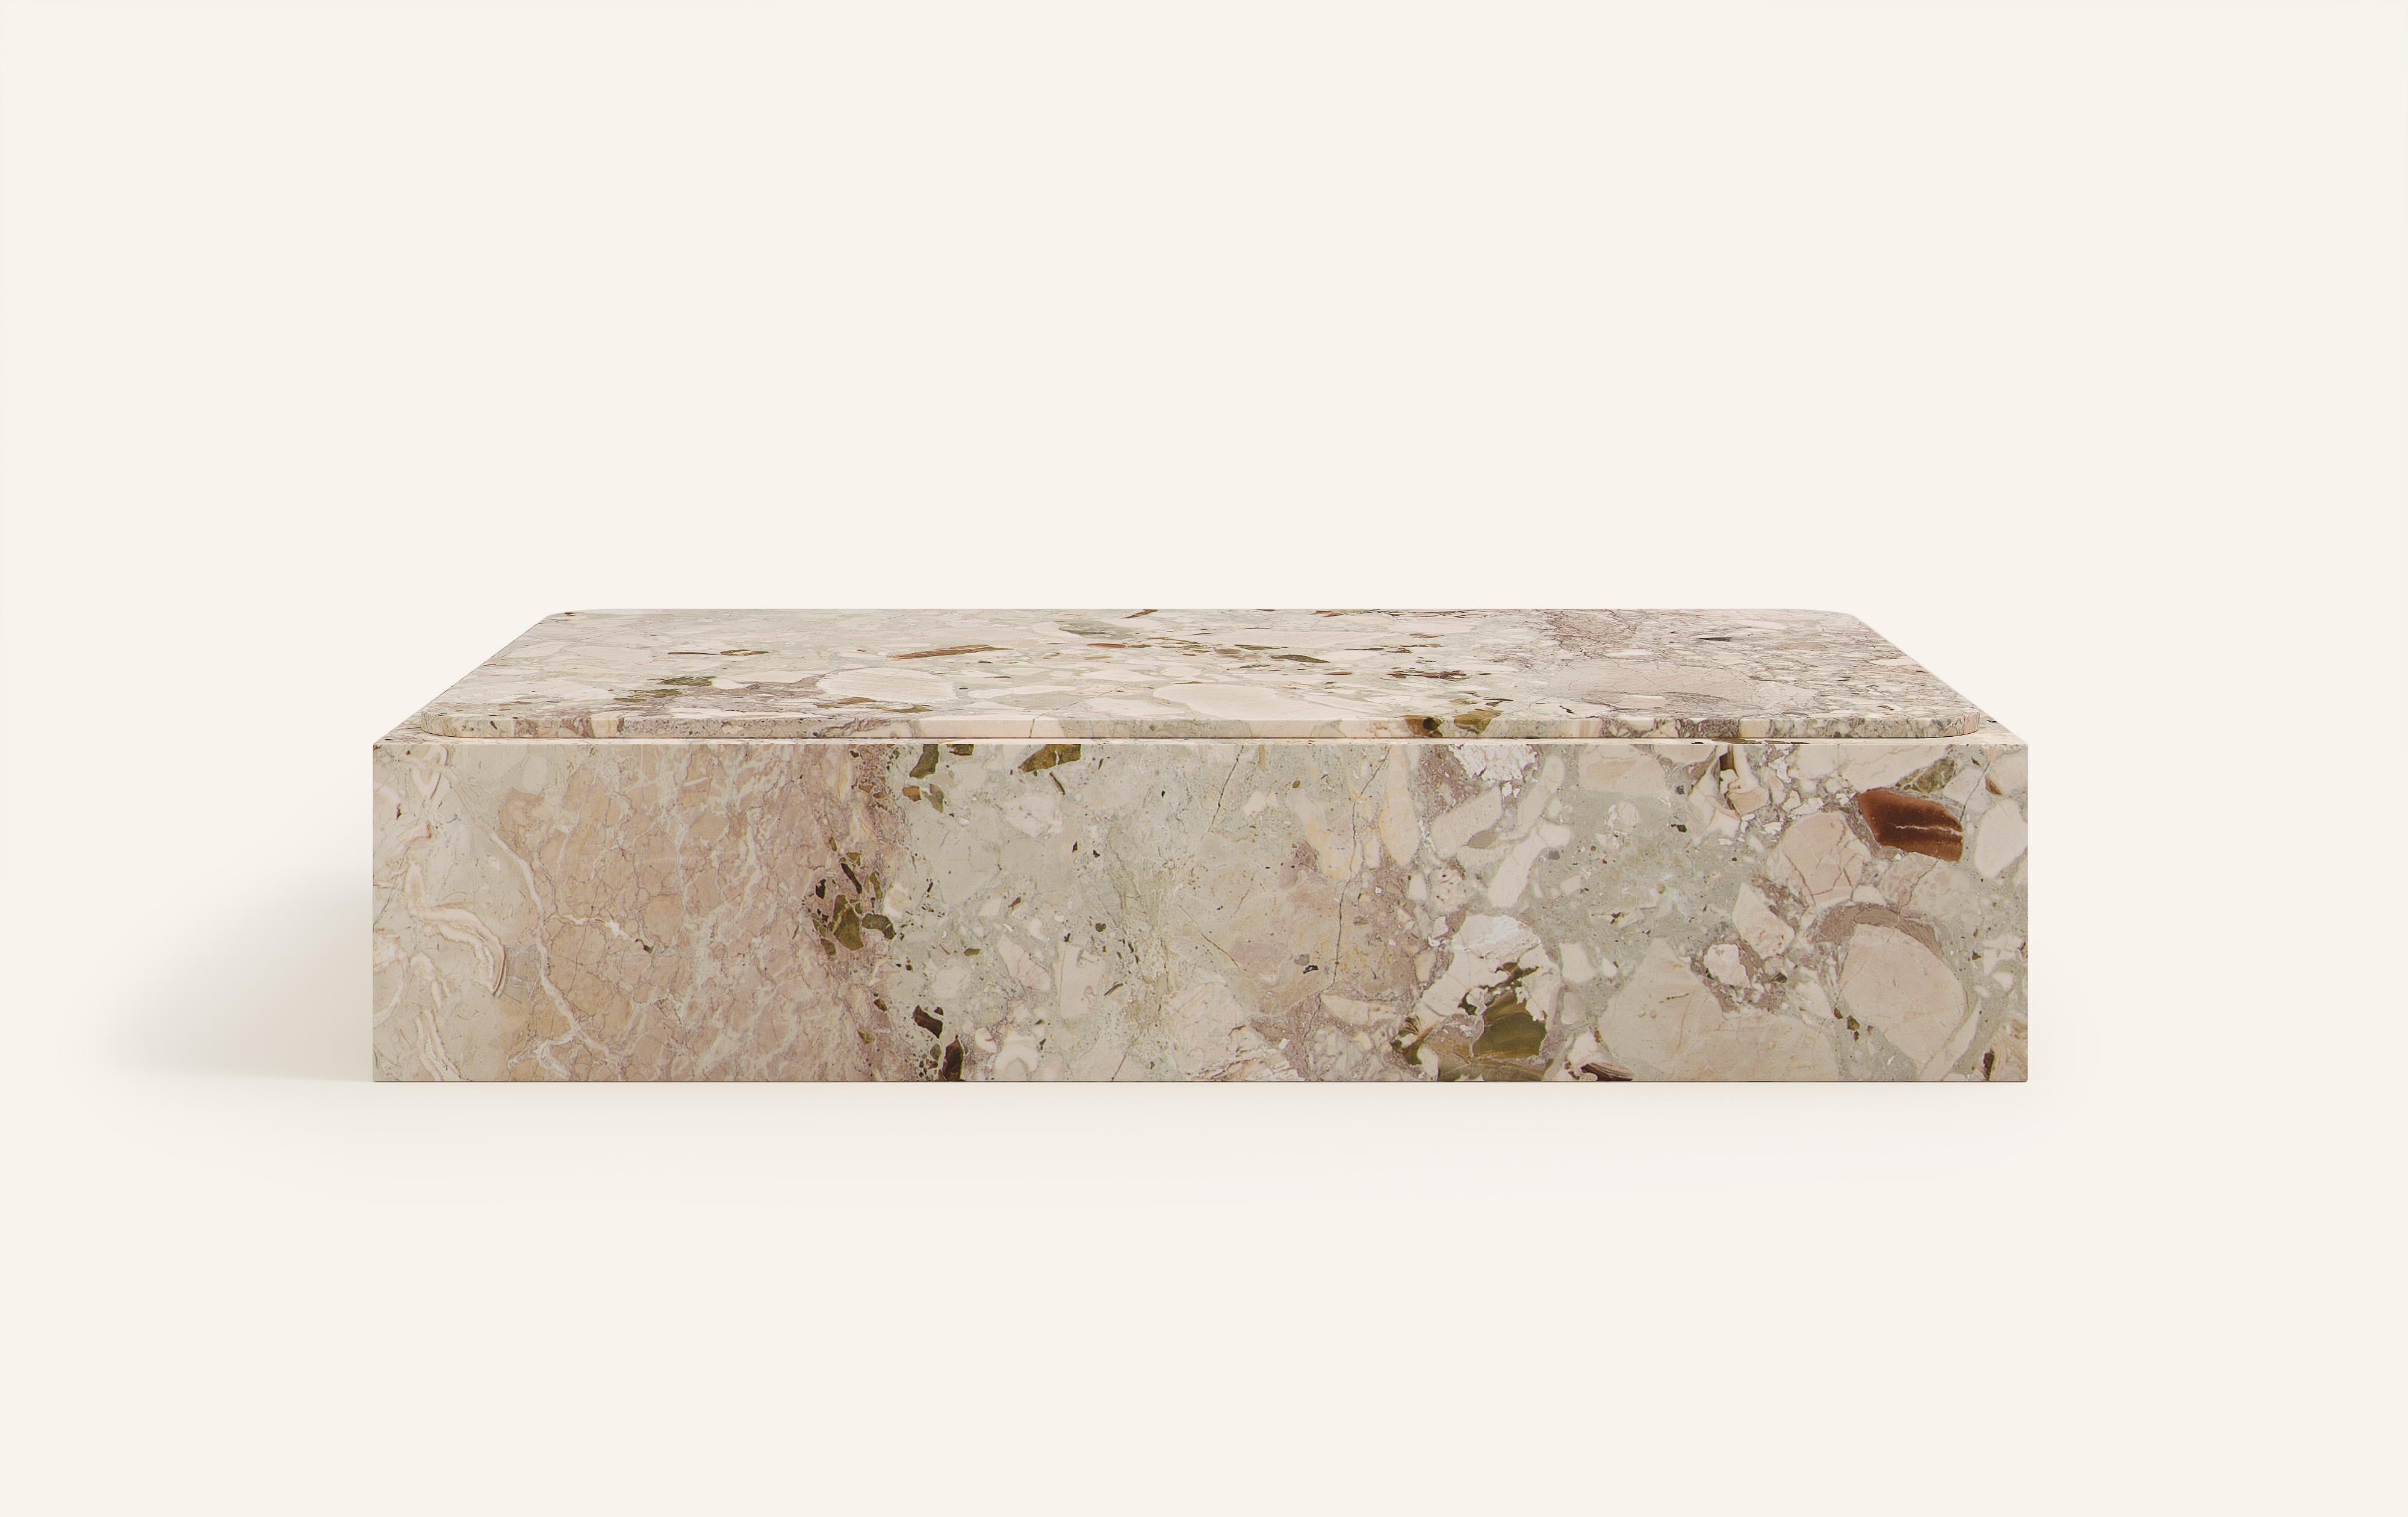 MONOLITHIC FORMS SOFTENED BY GENTLE EDGES. WITH ITS BOLD MARBLE PATTERNS CUBO IS AS VERSATILE AS IT IS STRIKING.

DIMENSIONS:
48”L x 30”W x 13”H: 
- 3/4